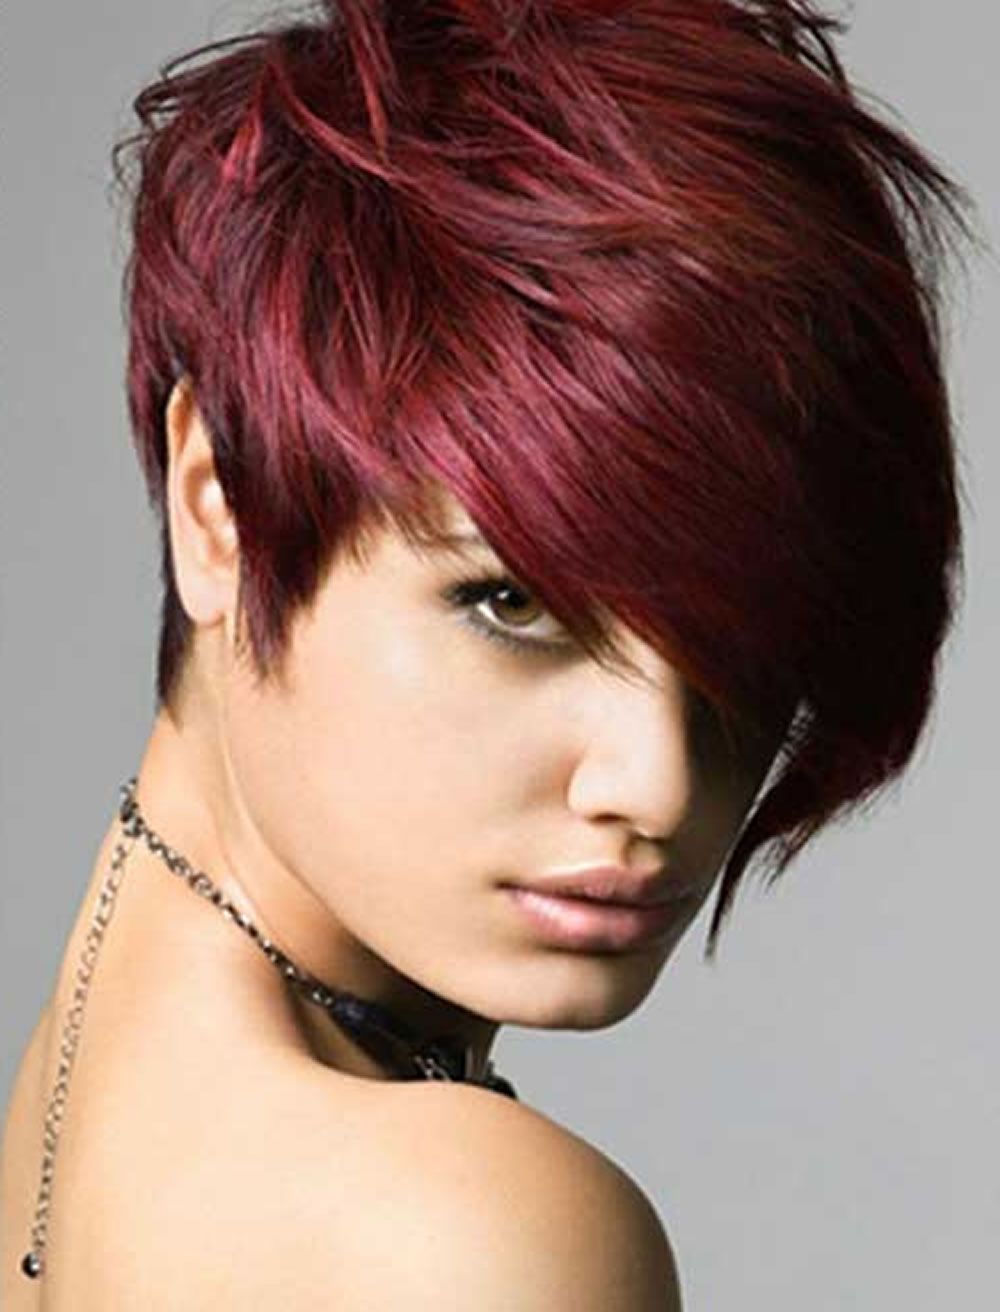 Red Hair Color For Short Hairstyles | 27 Cool Haircut Tutorial For With Regard To Short Haircuts With Red Hair (View 3 of 25)